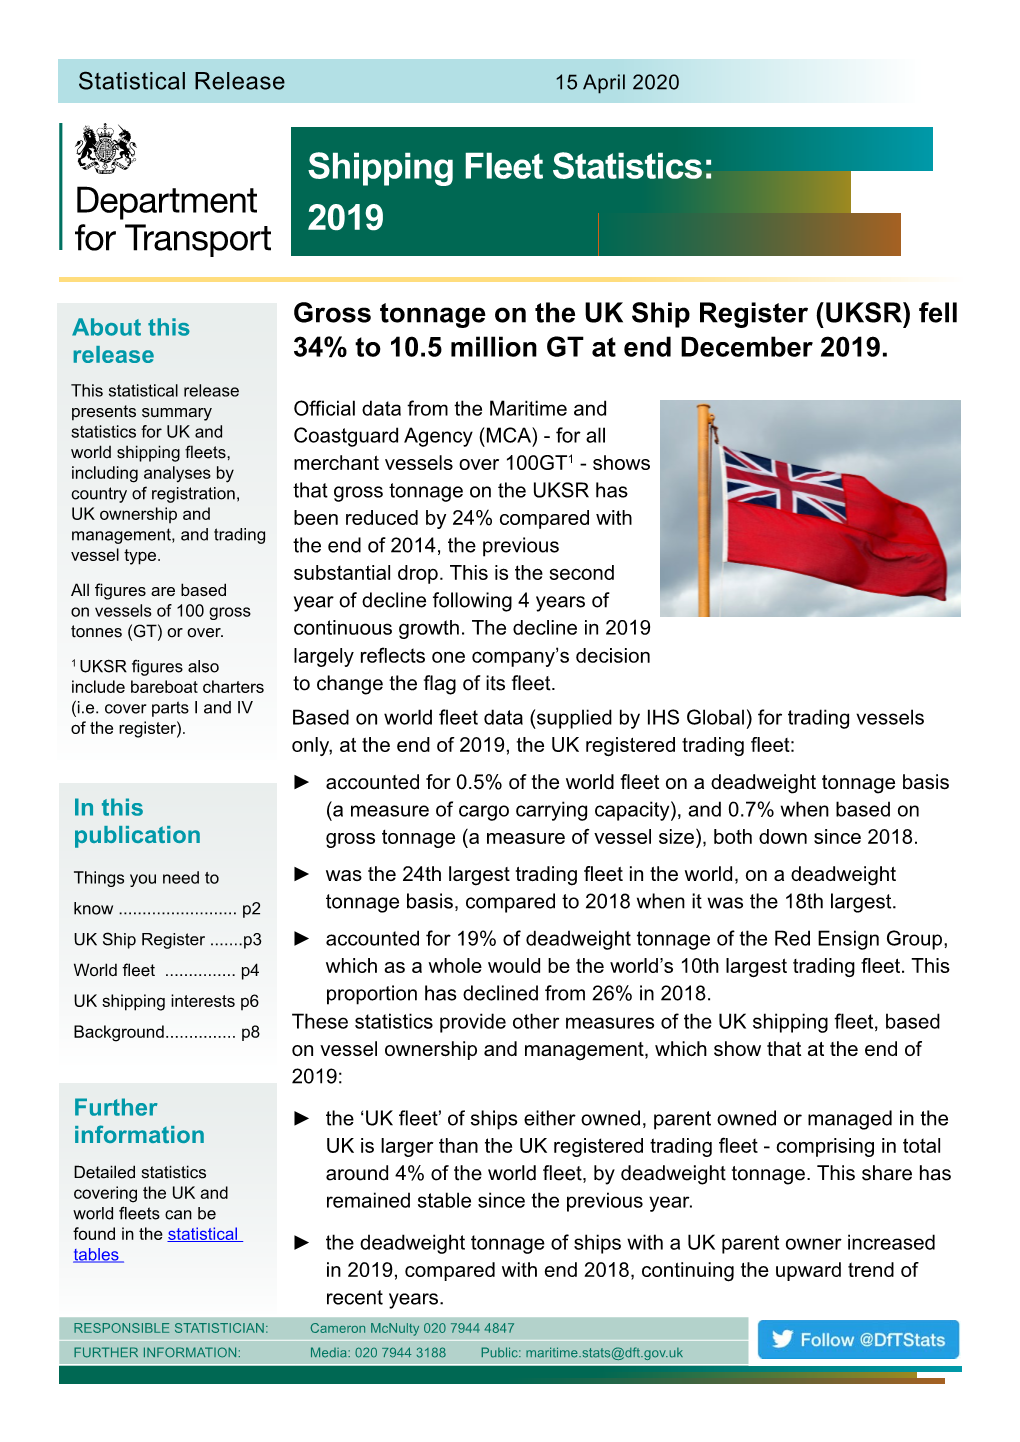 Shipping Fleet Statistics 2019 - Page 2 Section 1: the UK Ship Register